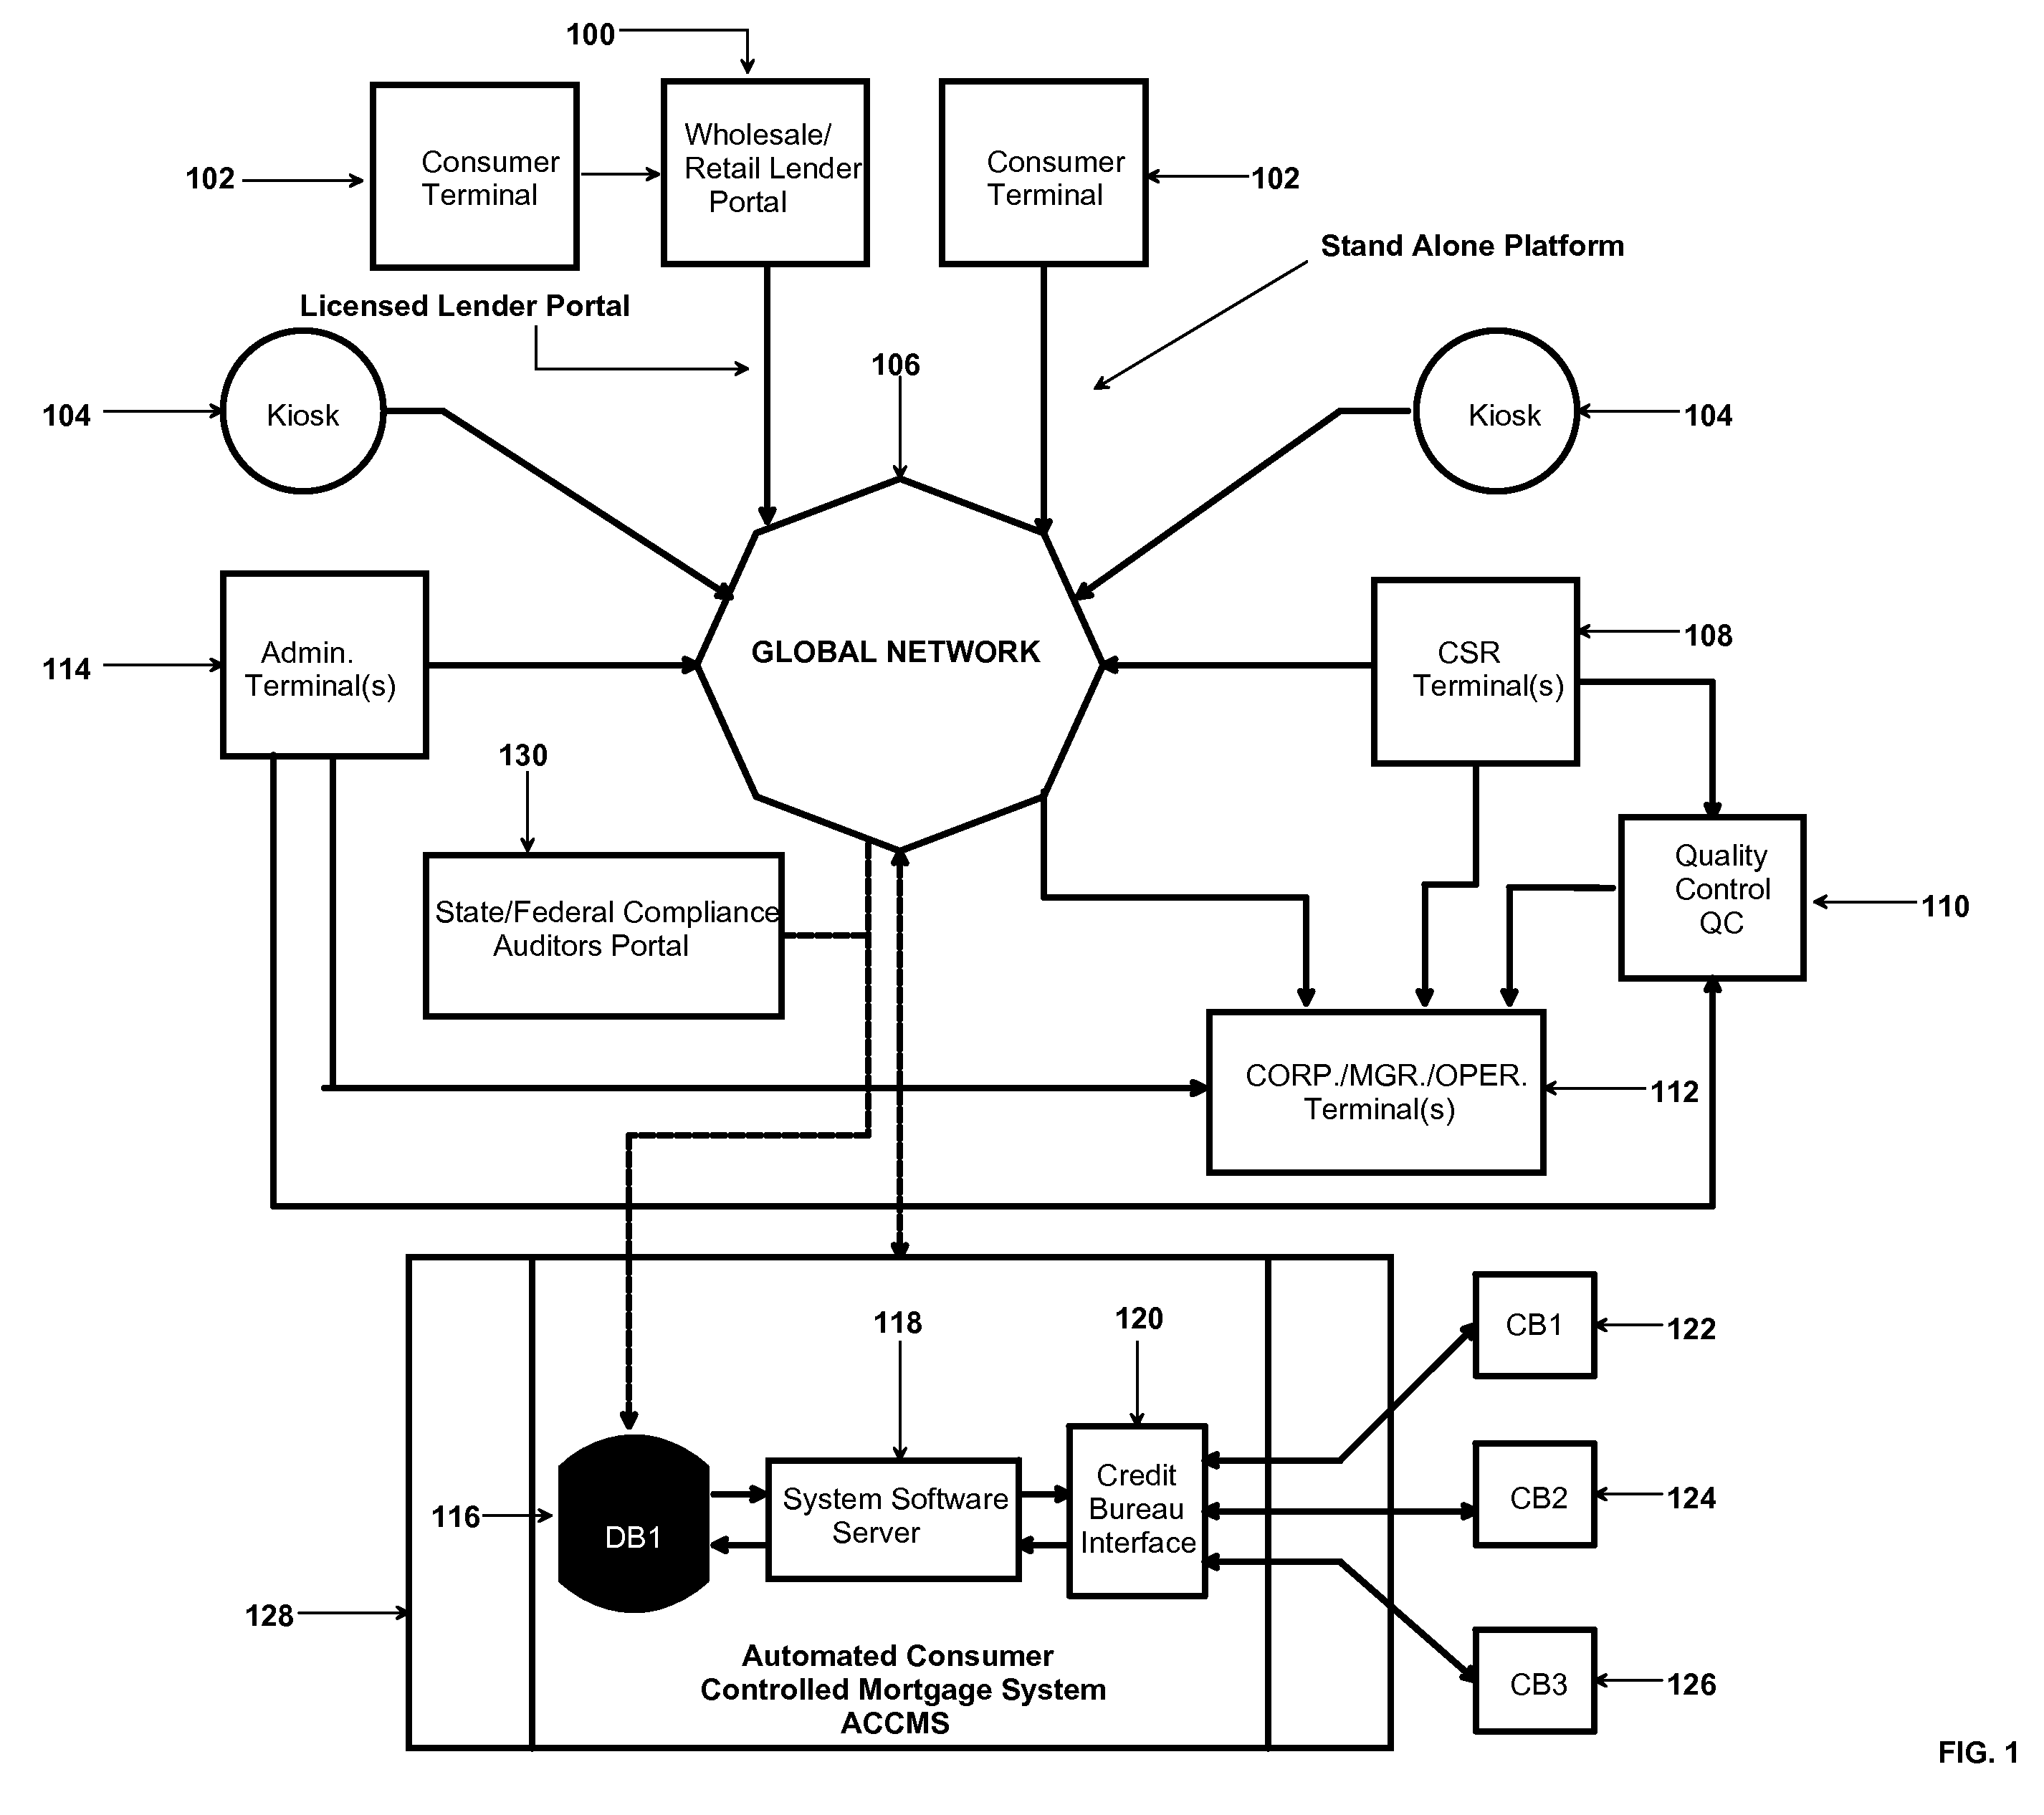 Process for an inclusive automated consumer controlled mortgage system (ACCMS) containing an automated mortgage monitoring and government compliance auditing system